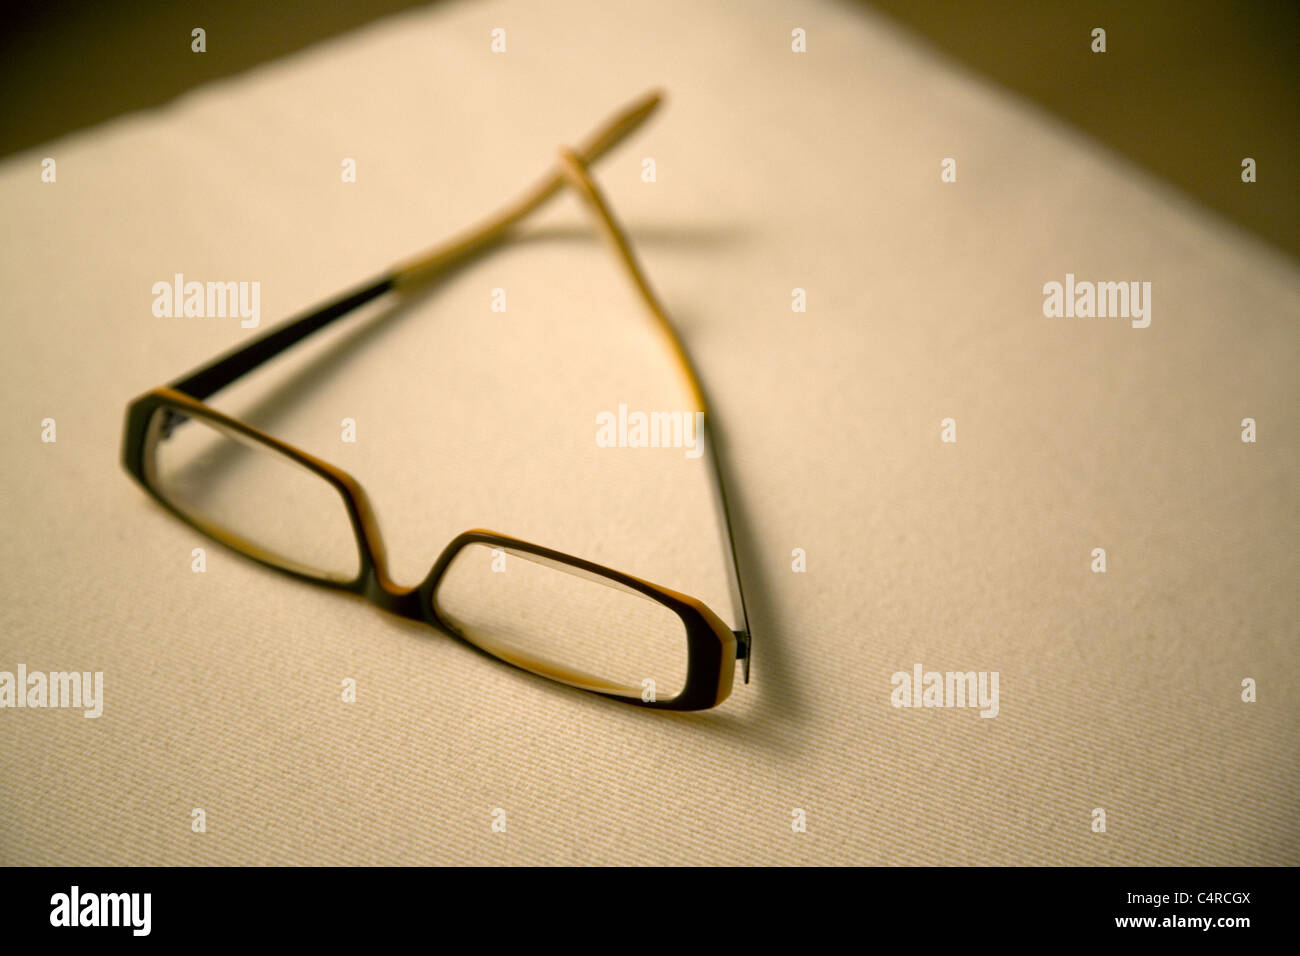 Pair of spectacles Stock Photo